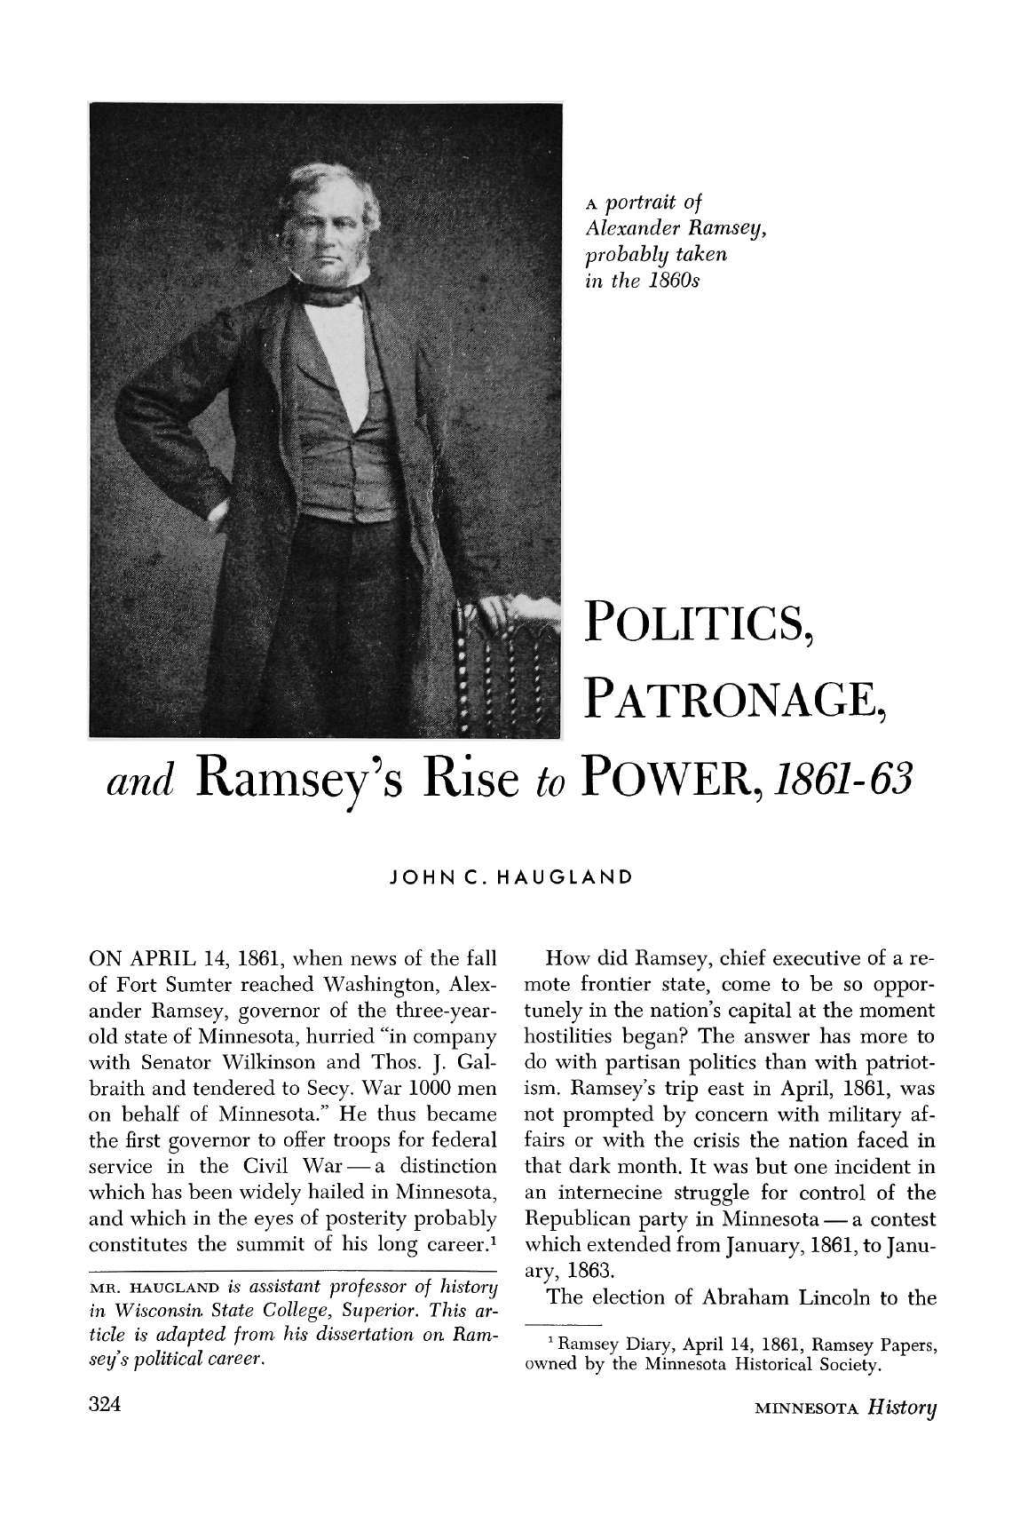 Politics, Patronage, and Ramsey's Rise to Power, 1861-63